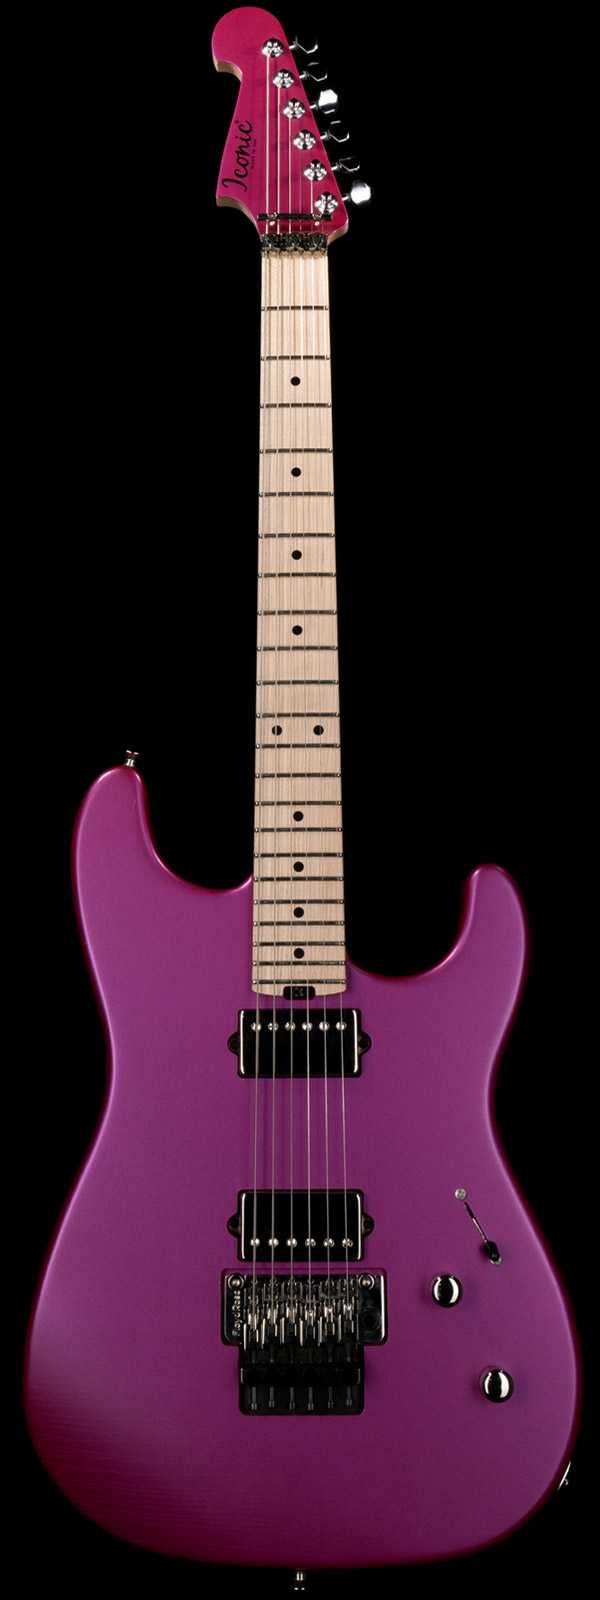 Iconic Evolution SD Floyd Rose Light Aging Pin-Up Pink